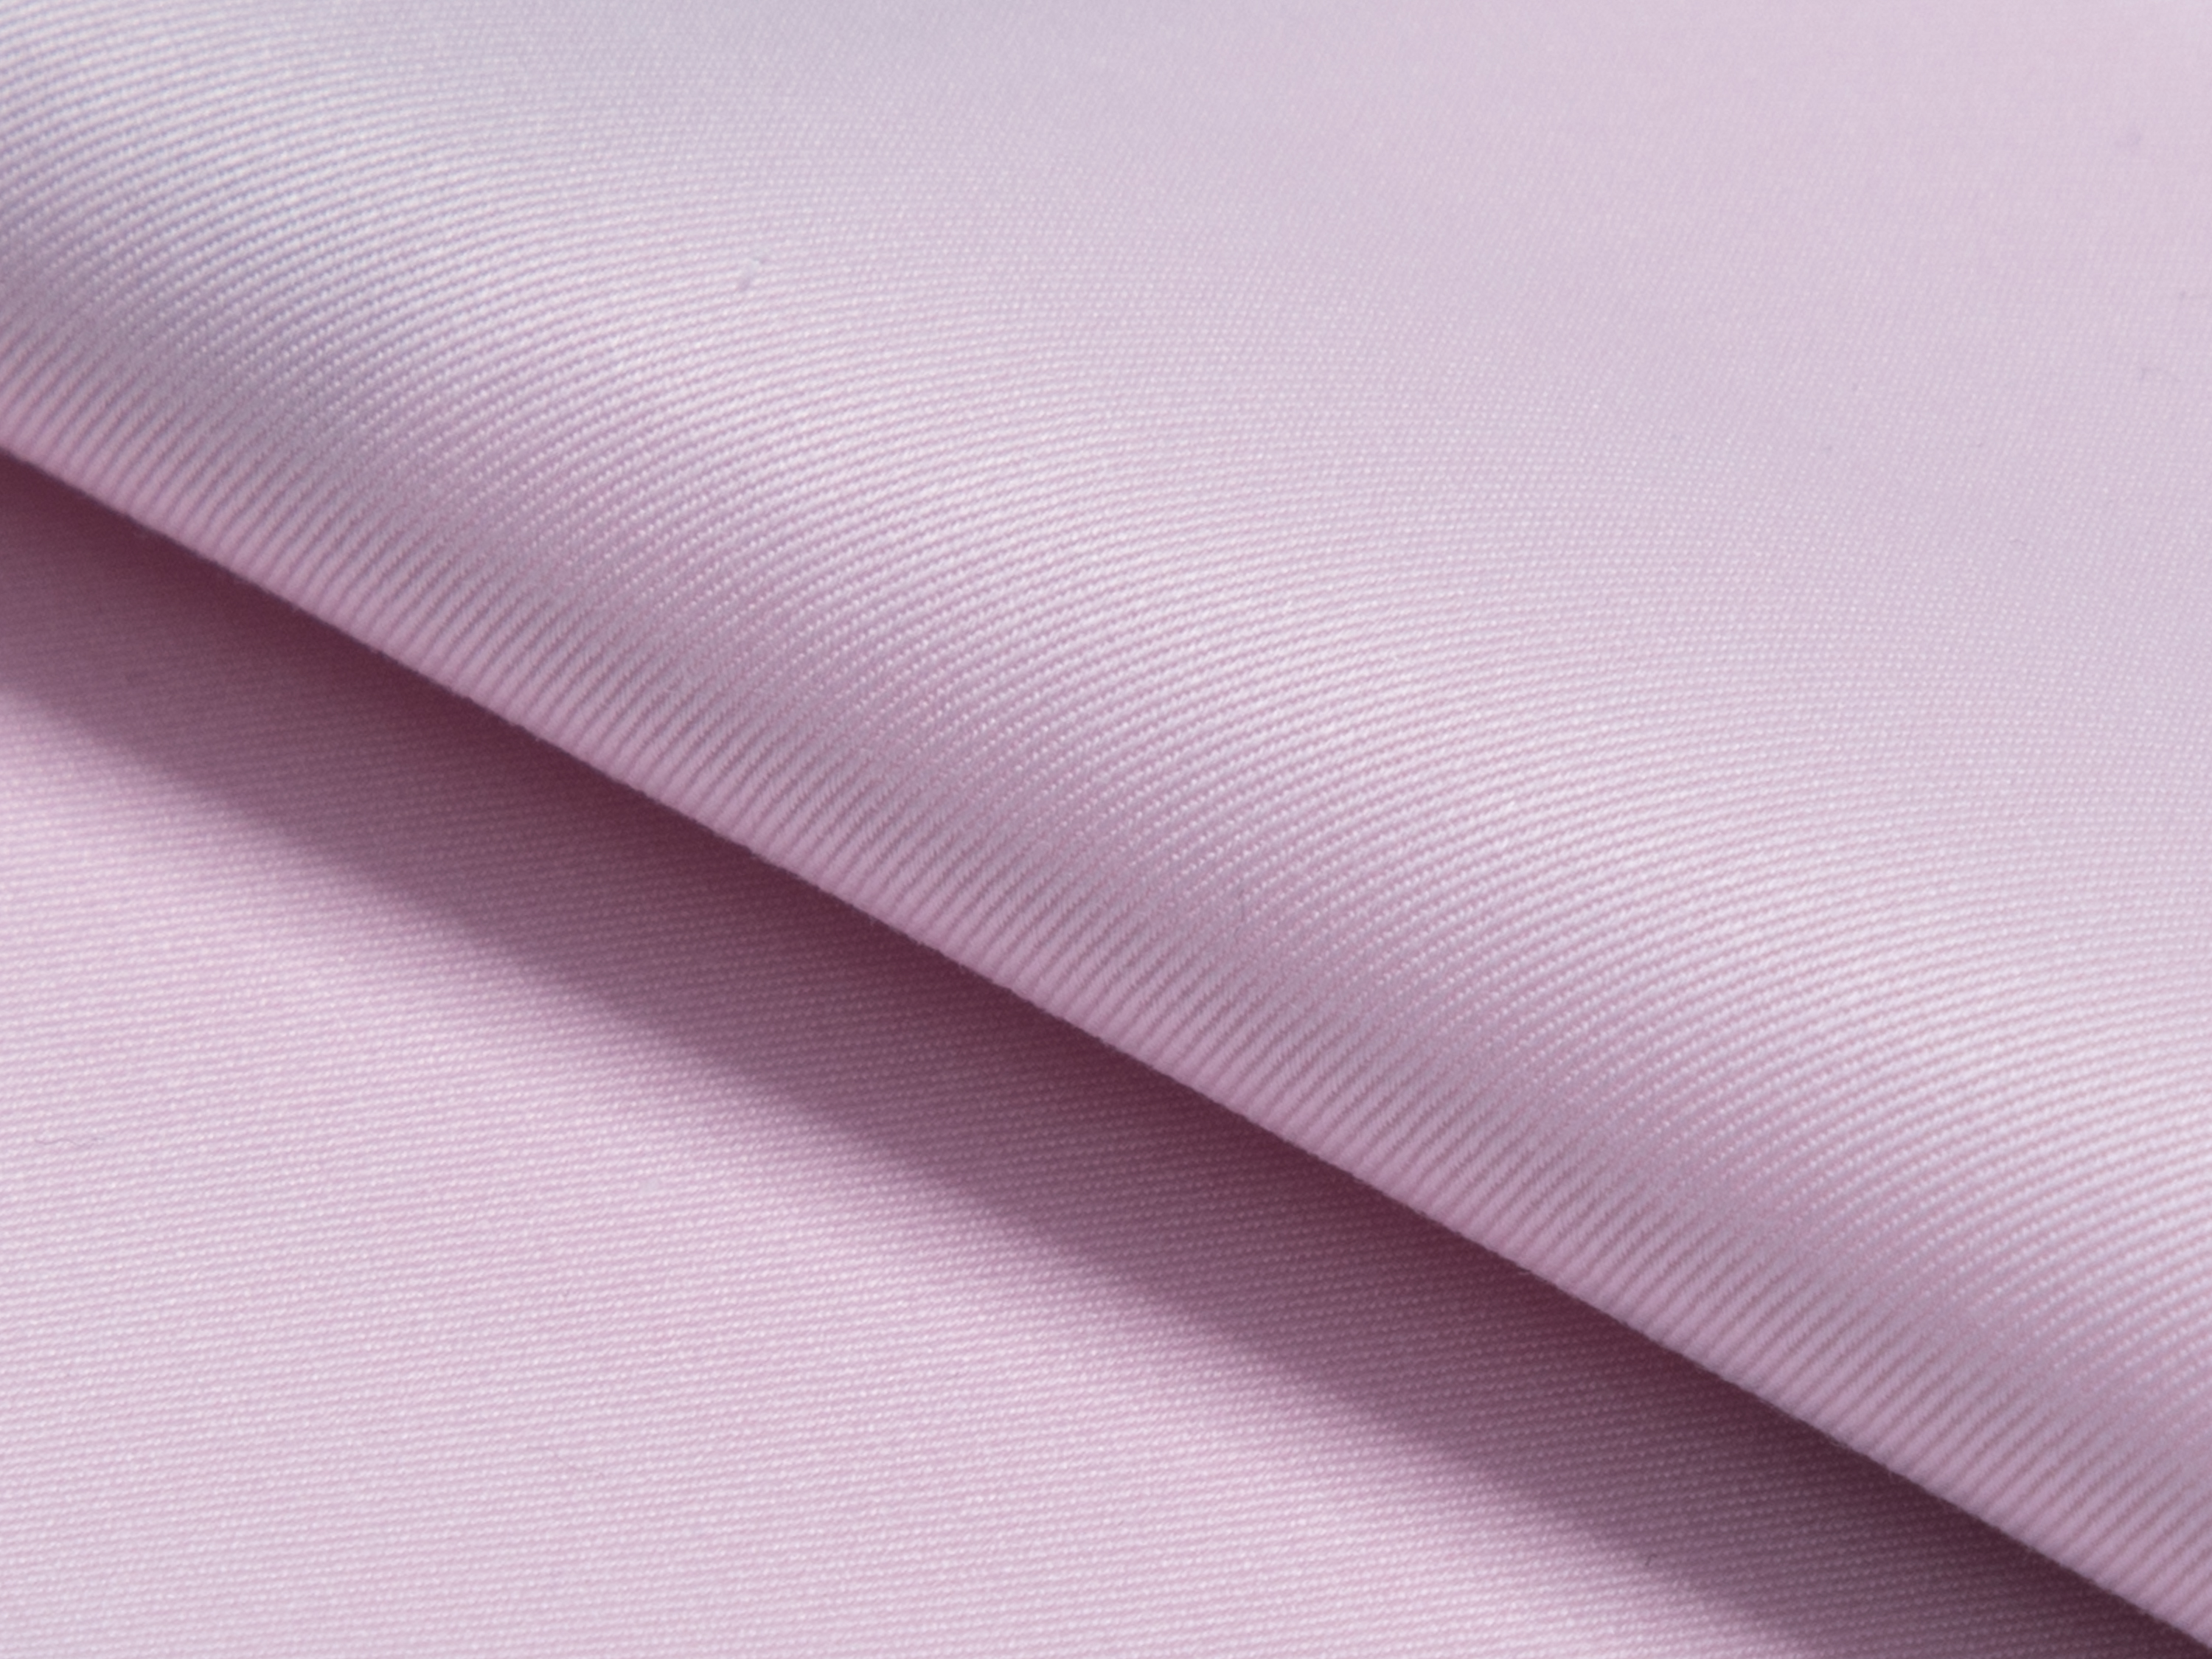 Buy tailor made shirts online - MAYFAIR - Twill Pink